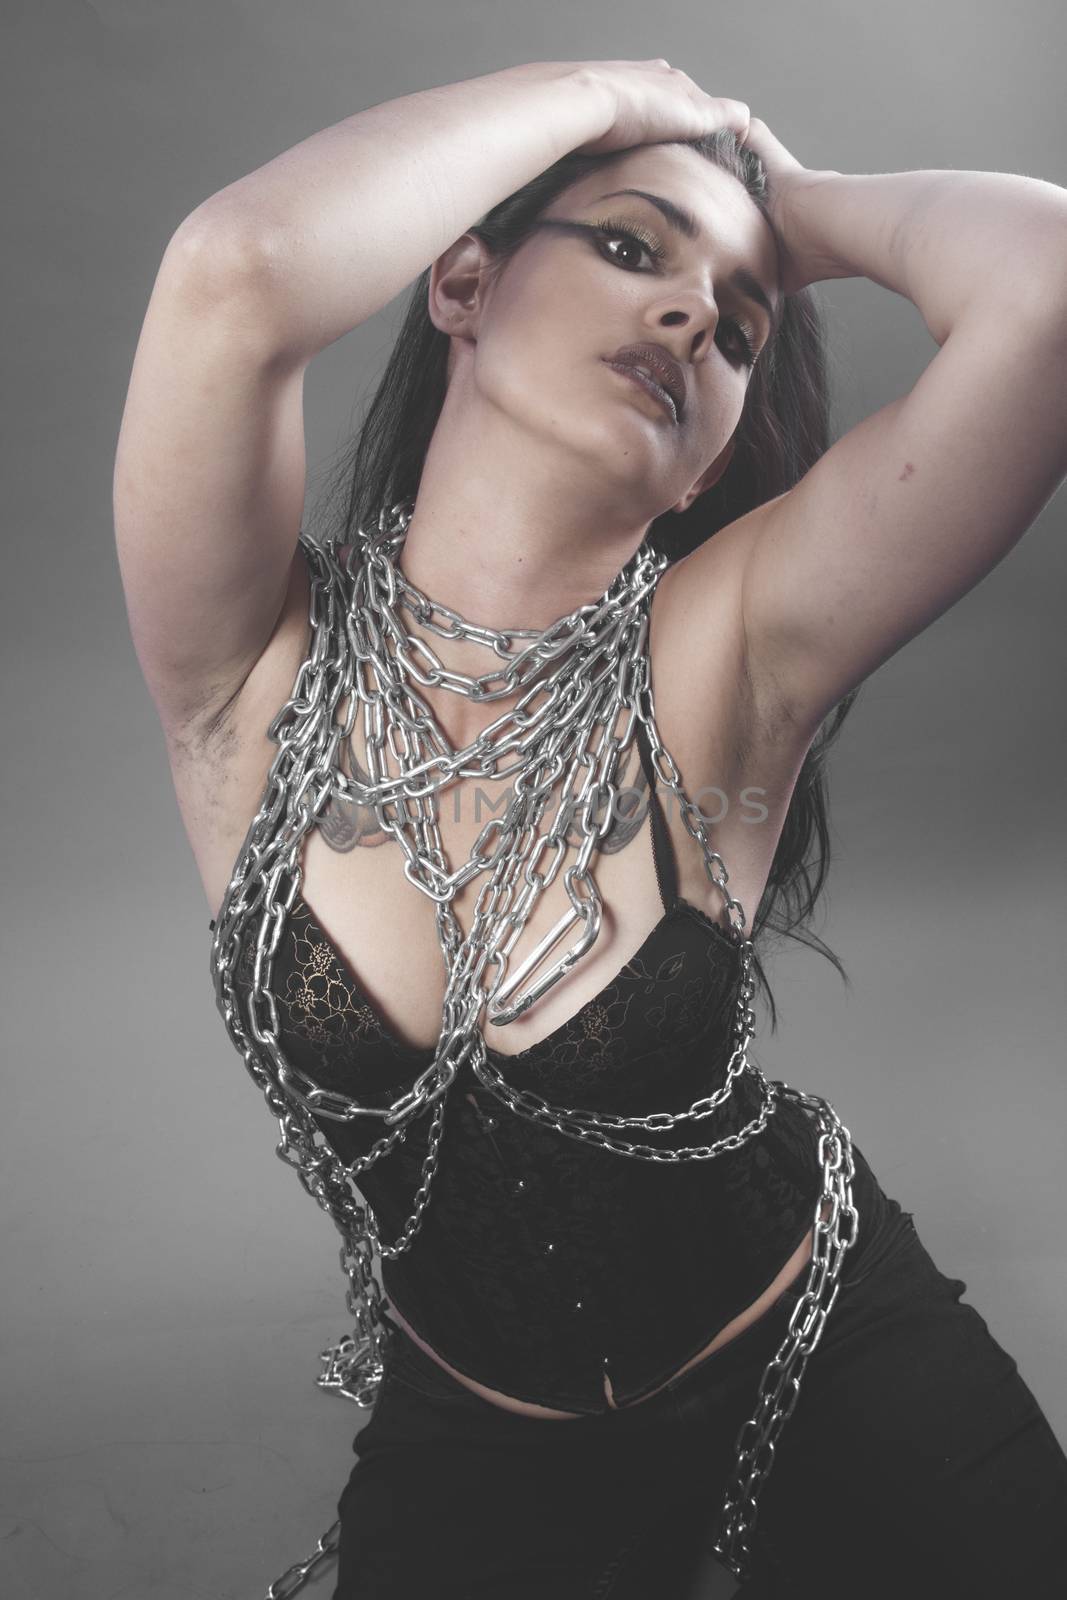 Slave, Beautiful brunette woman with big silver chains chained